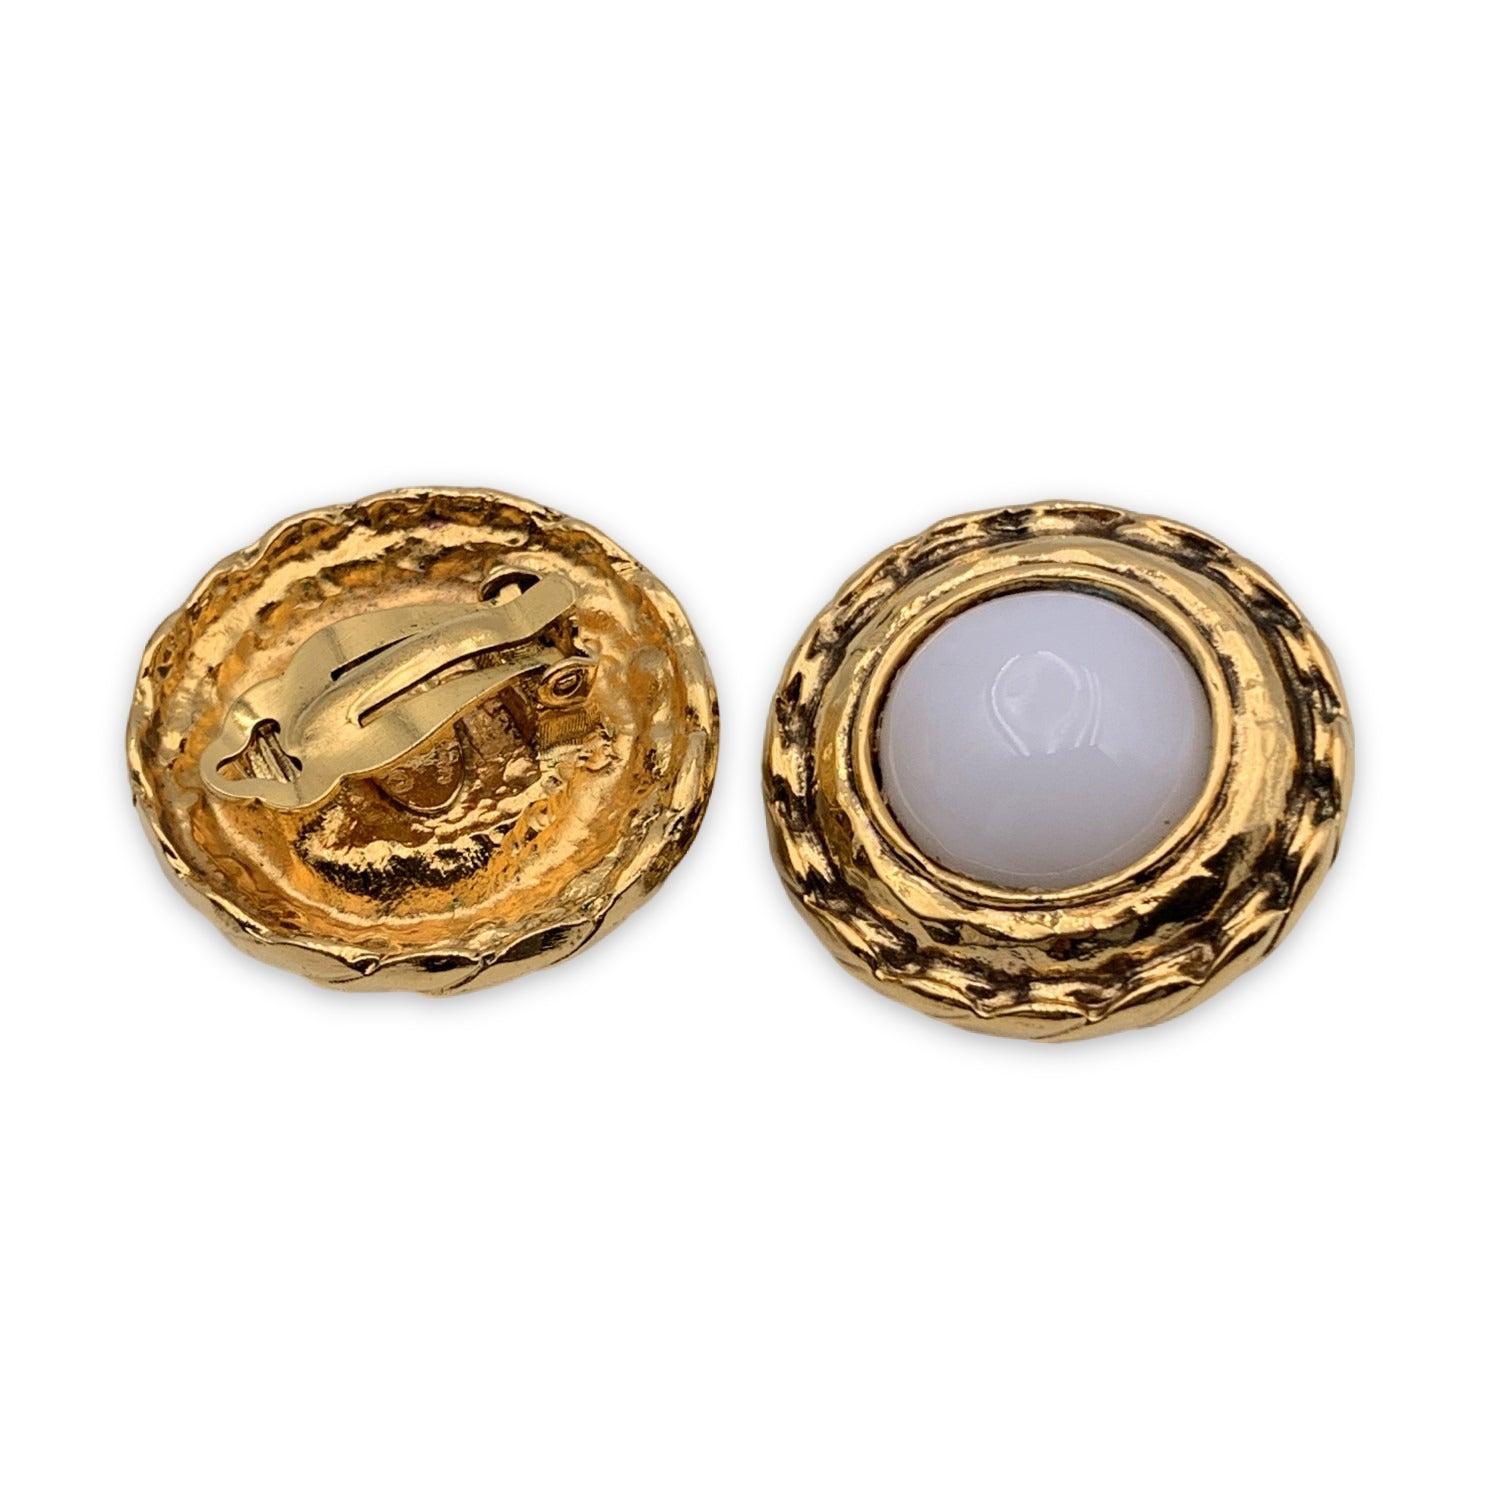 Gorgeous vintage CHANEL earrings. White Cabochon and gold metal frame. Clip-on earrings. Signed 'Chanel CC - Made in France' oval hallmark on the reverse of the earring. Diameter: 1.25 inches - 32mm Condition A - EXCELLENT Gently used. Please, look